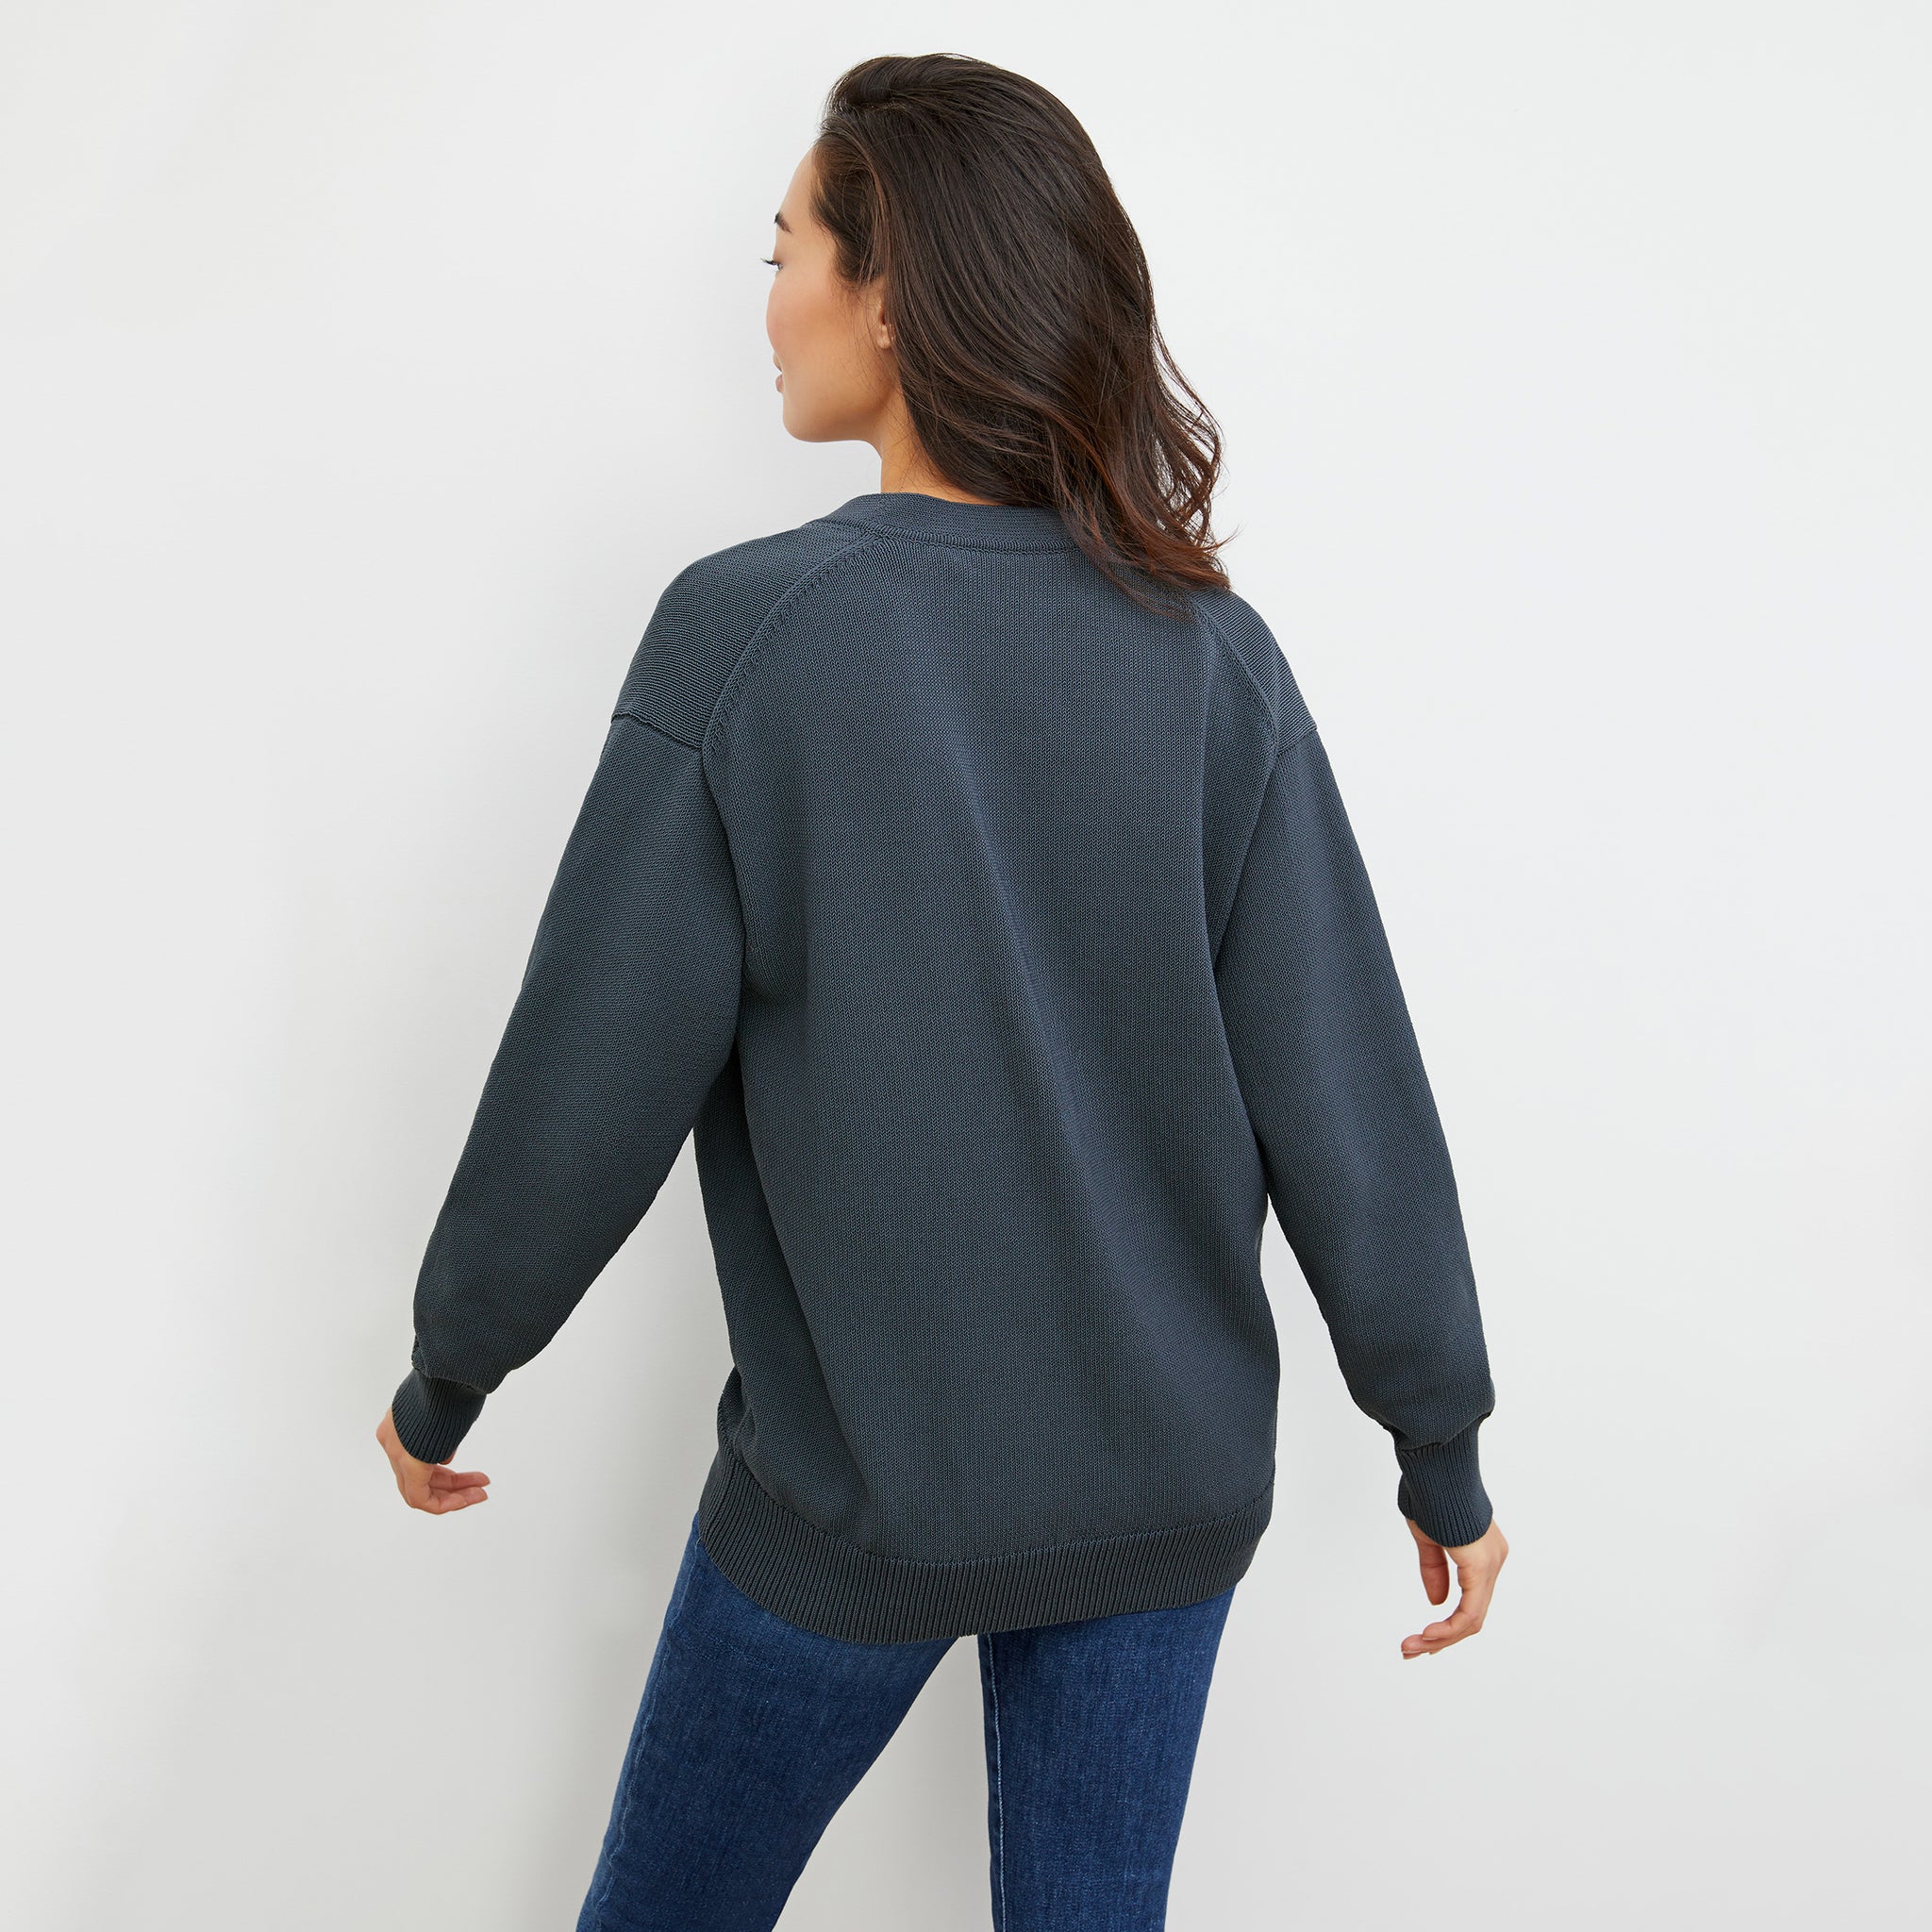 Back image of a woman wearing the Cookie Cardigan - Sleek Cotton in Dusty Indigo